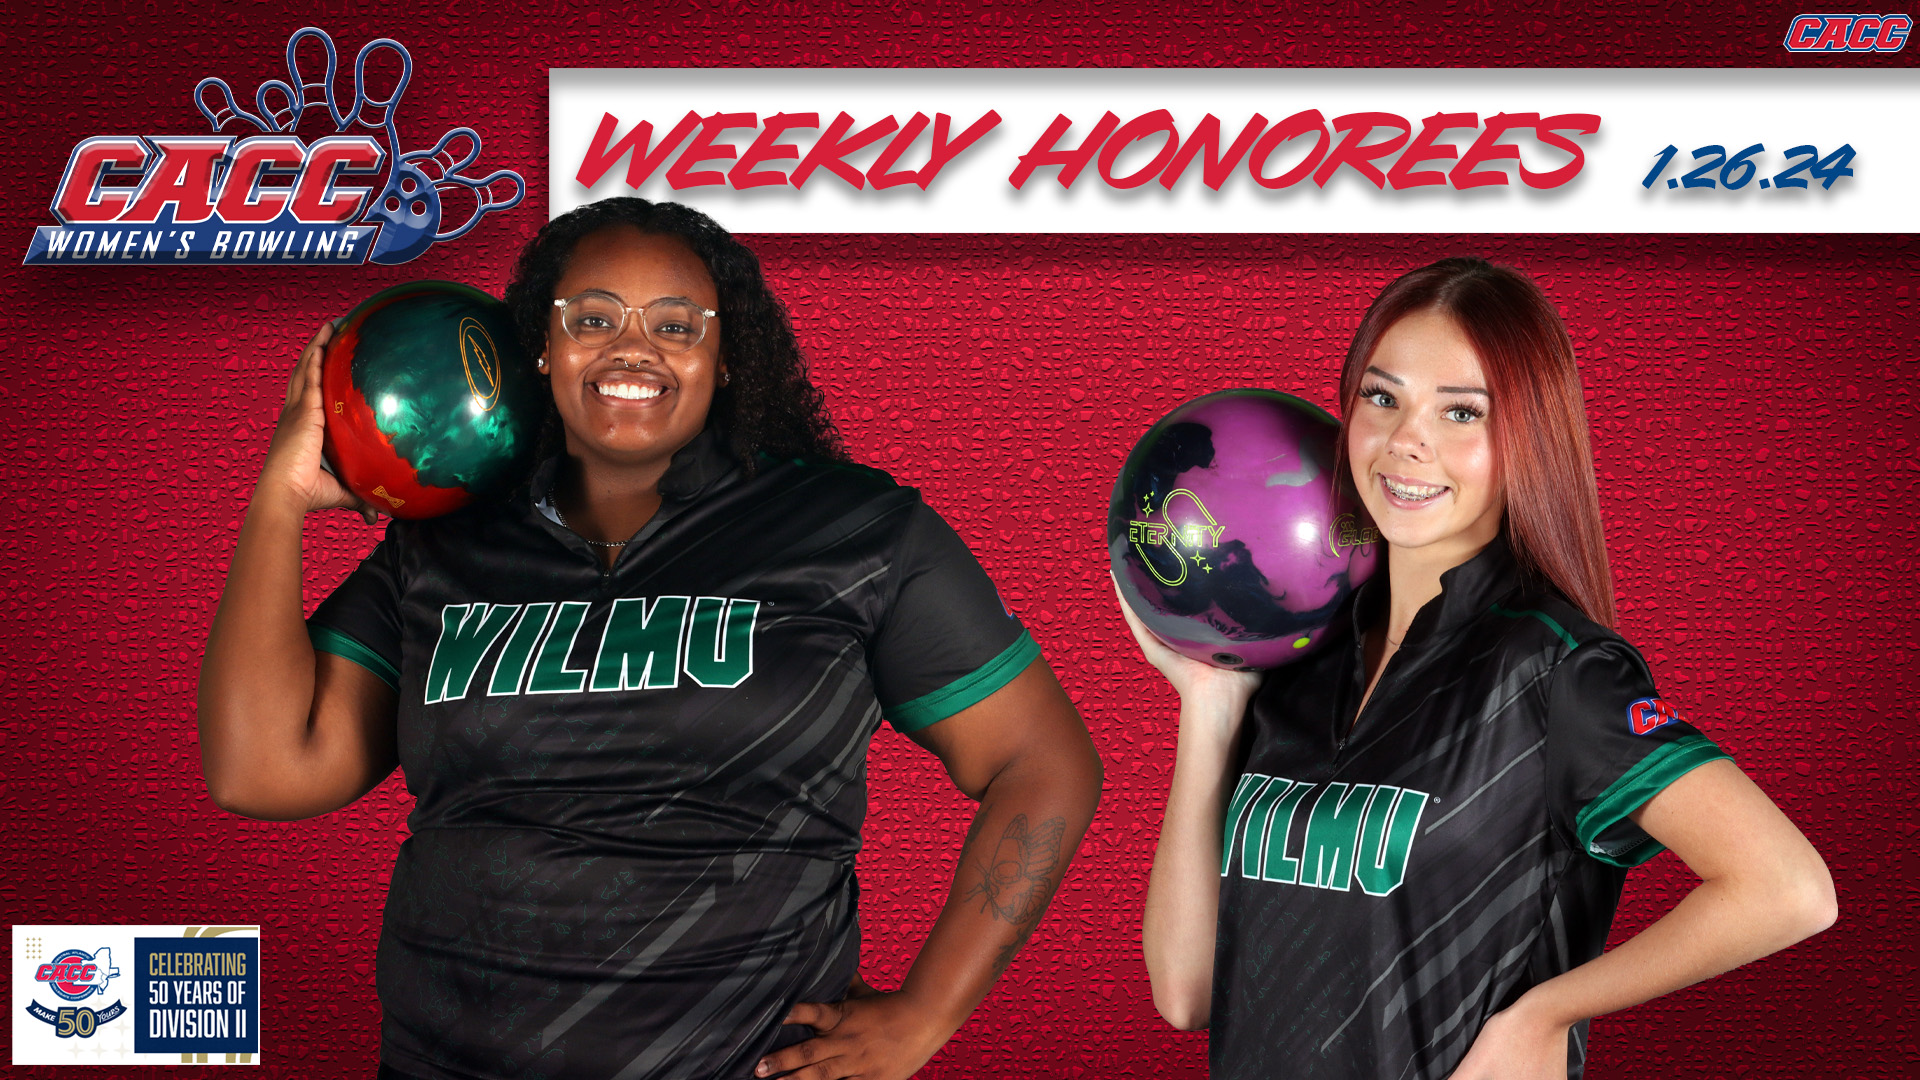 CACC Women's Bowling Weekly Awards (1-26-24)